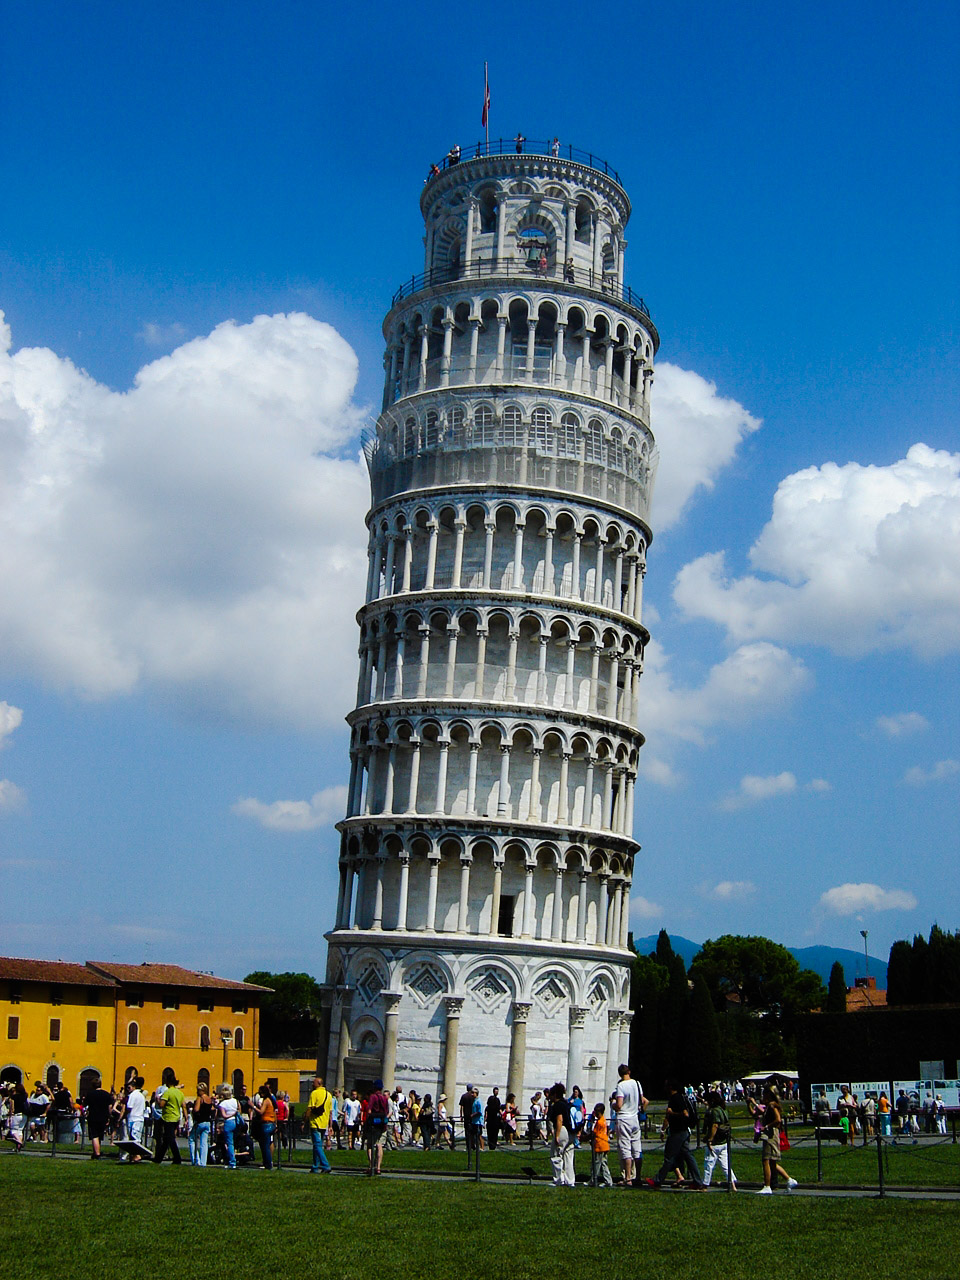 Leaning Tower of Pisa of pisa with people in front of it